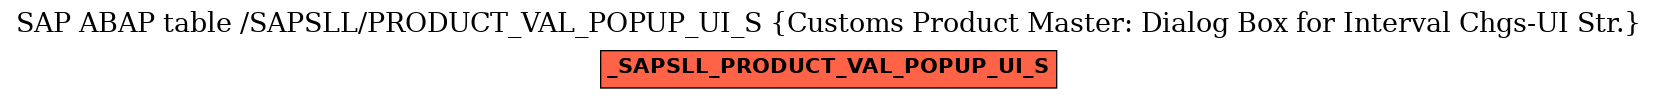 E-R Diagram for table /SAPSLL/PRODUCT_VAL_POPUP_UI_S (Customs Product Master: Dialog Box for Interval Chgs-UI Str.)